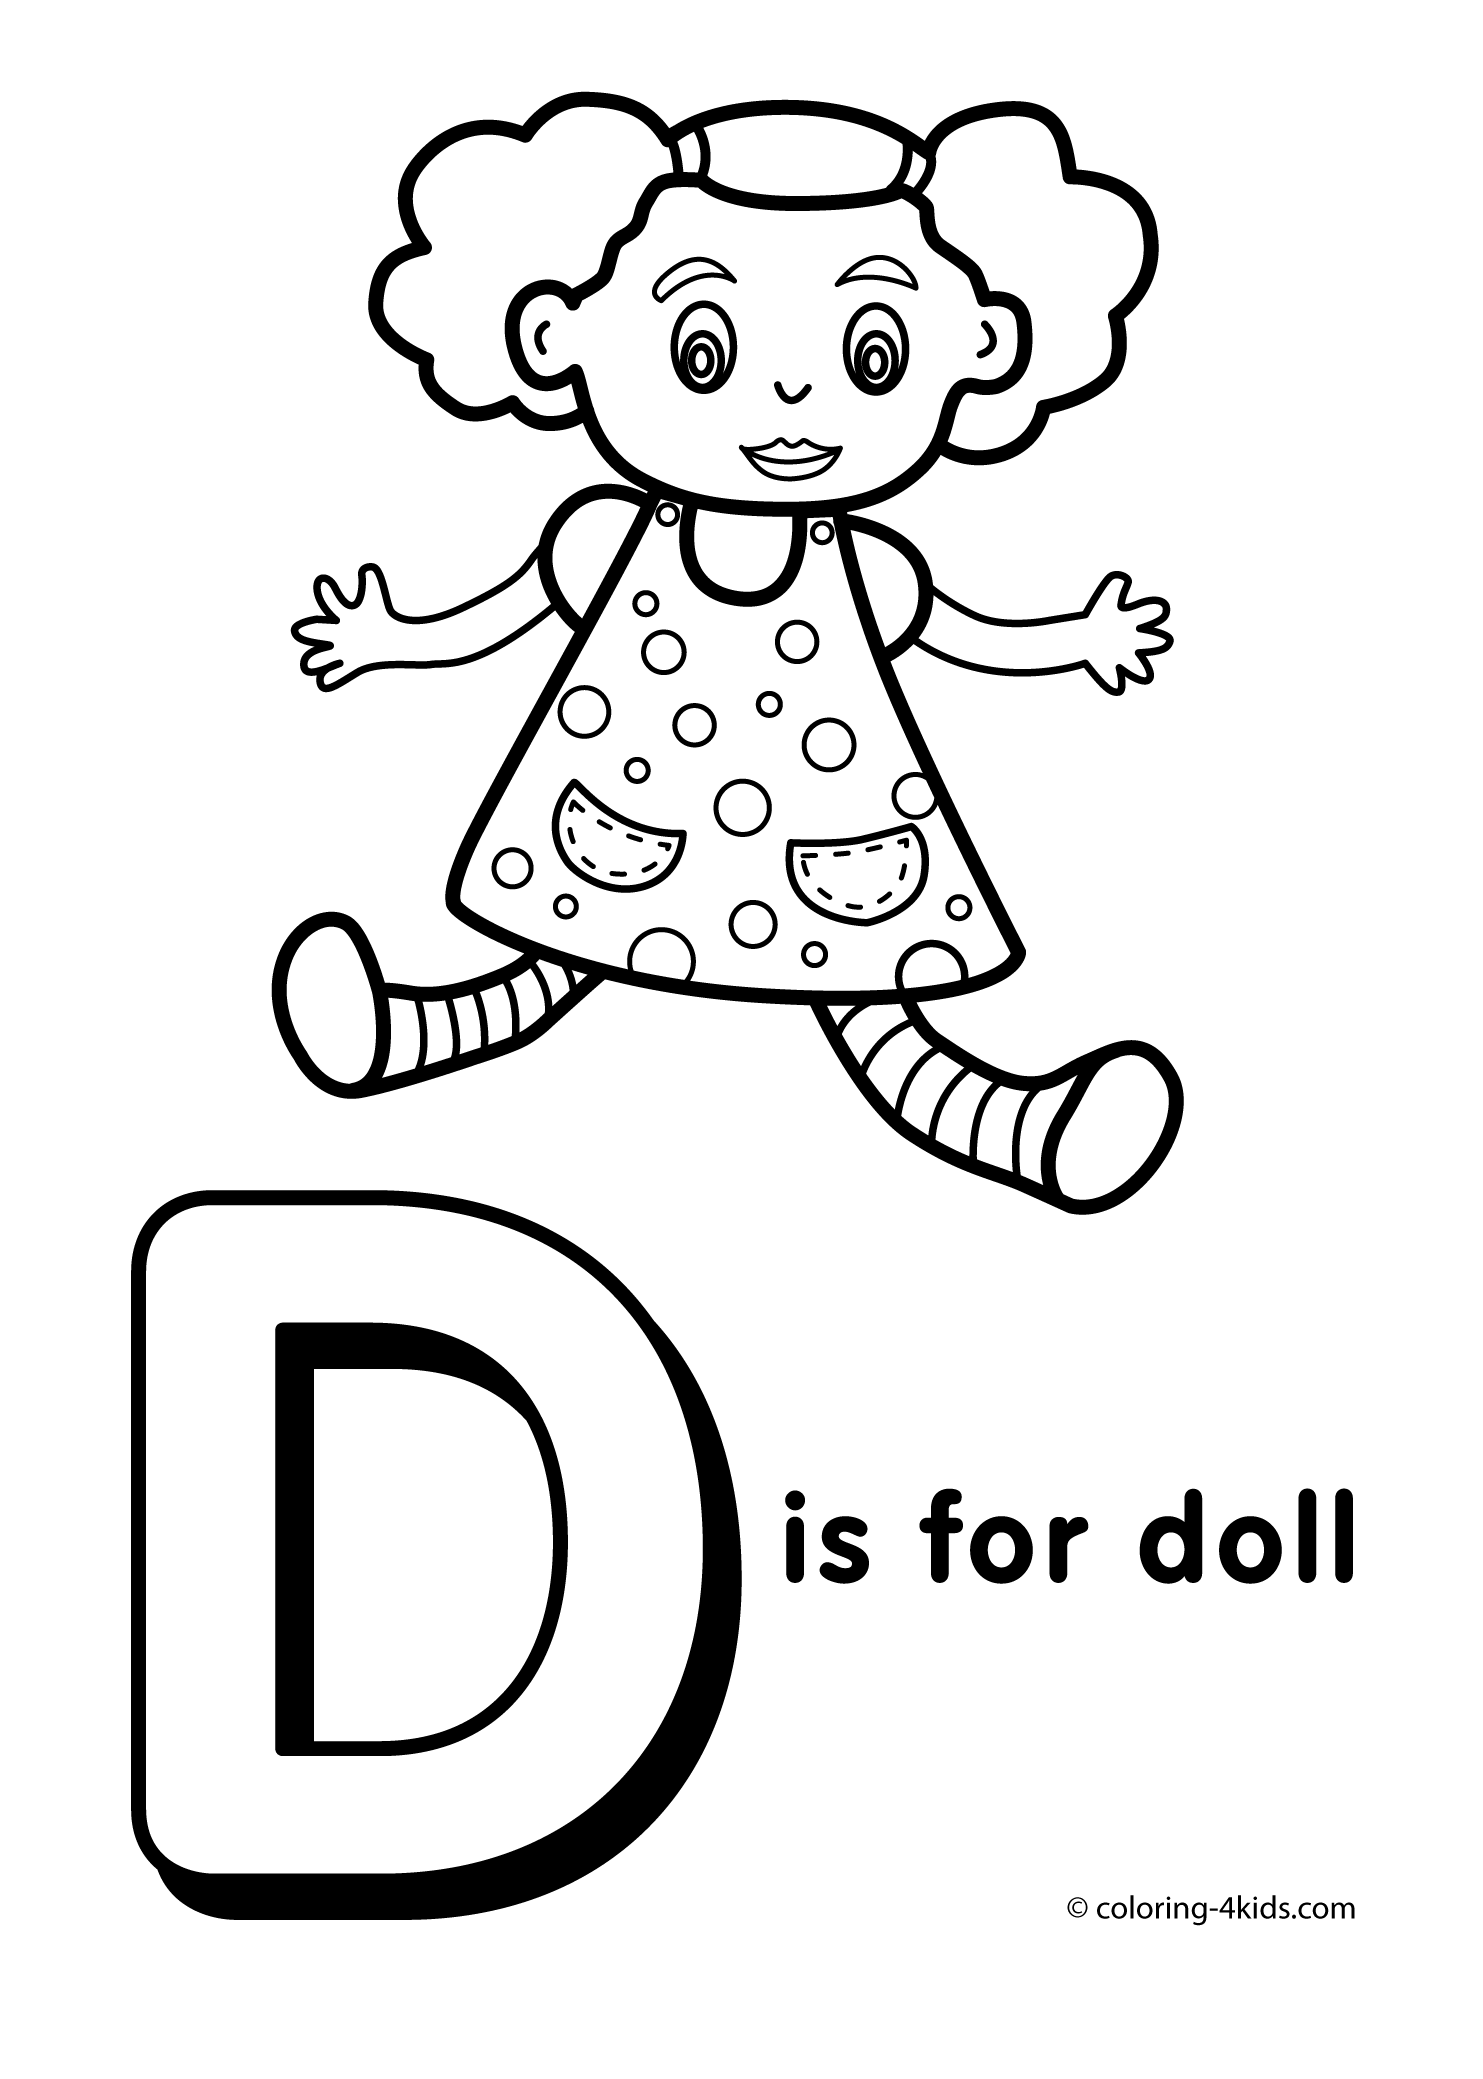 letter d coloring pages for toddlers pin by jan bumann on color pagesscience projects pages toddlers letter d for coloring 